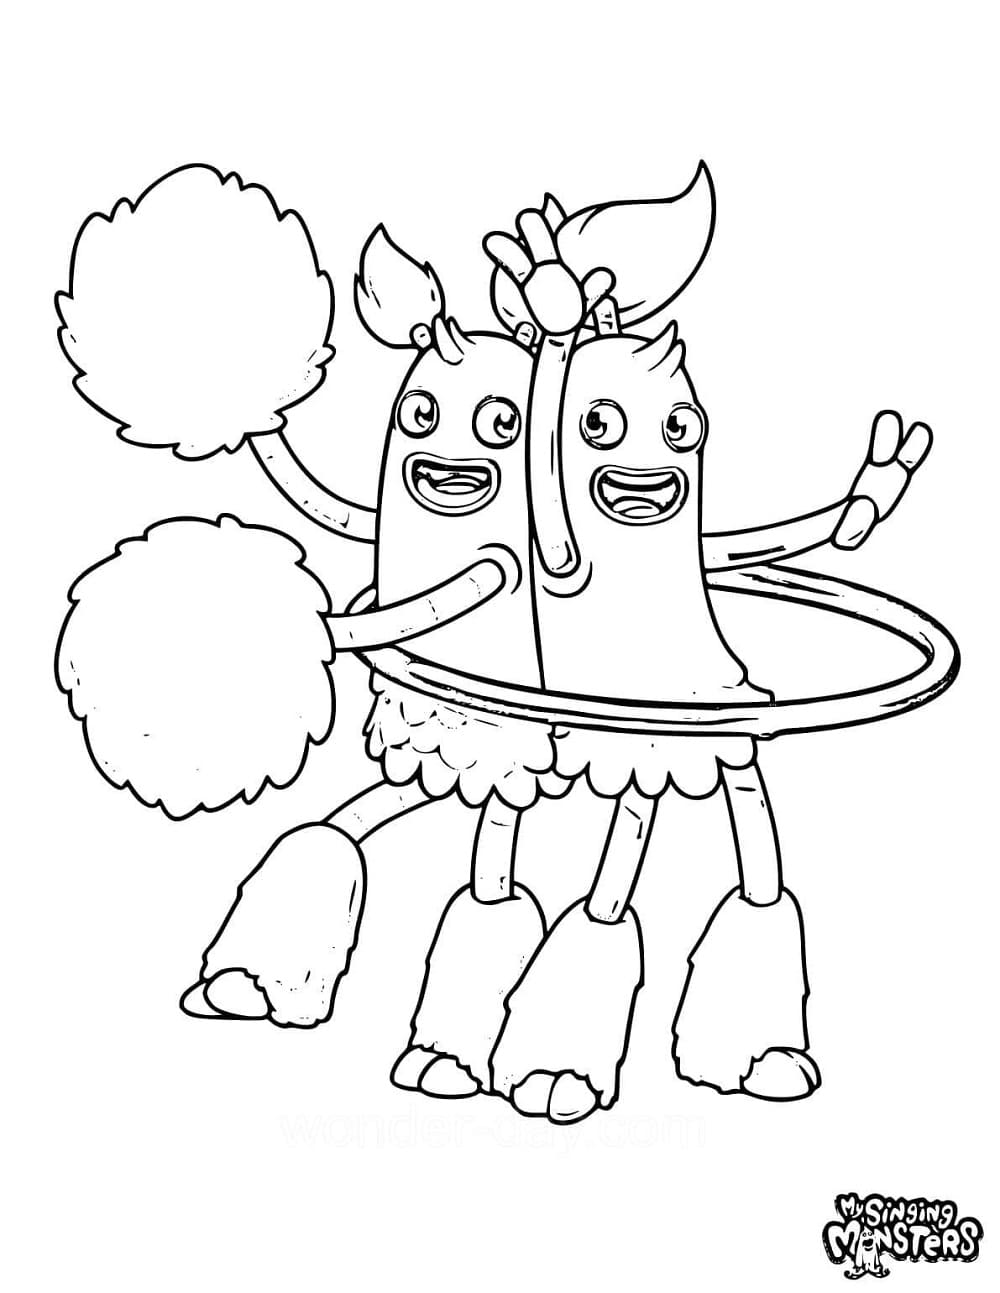 Printable Pom Pom and Hoola from My Singing Monsters Coloring Page